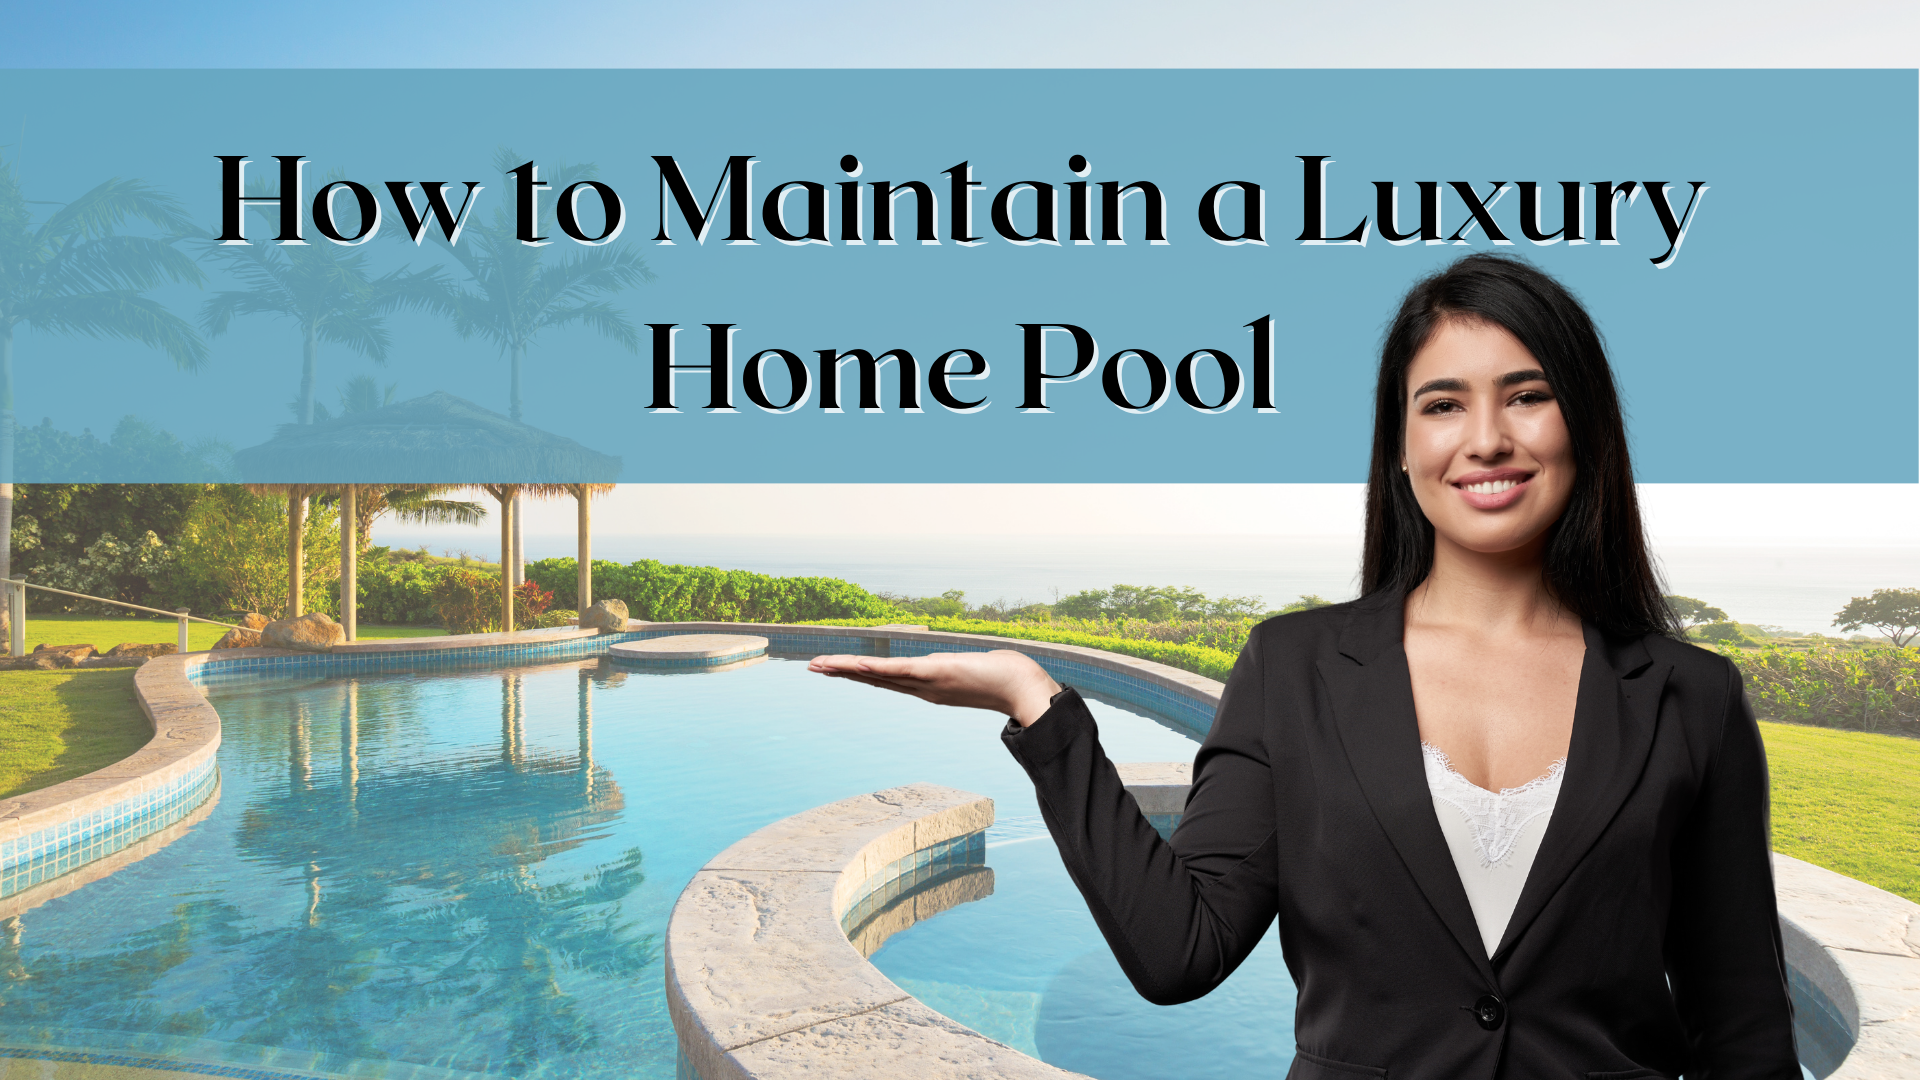 How to Maintain a Luxury Home Pool